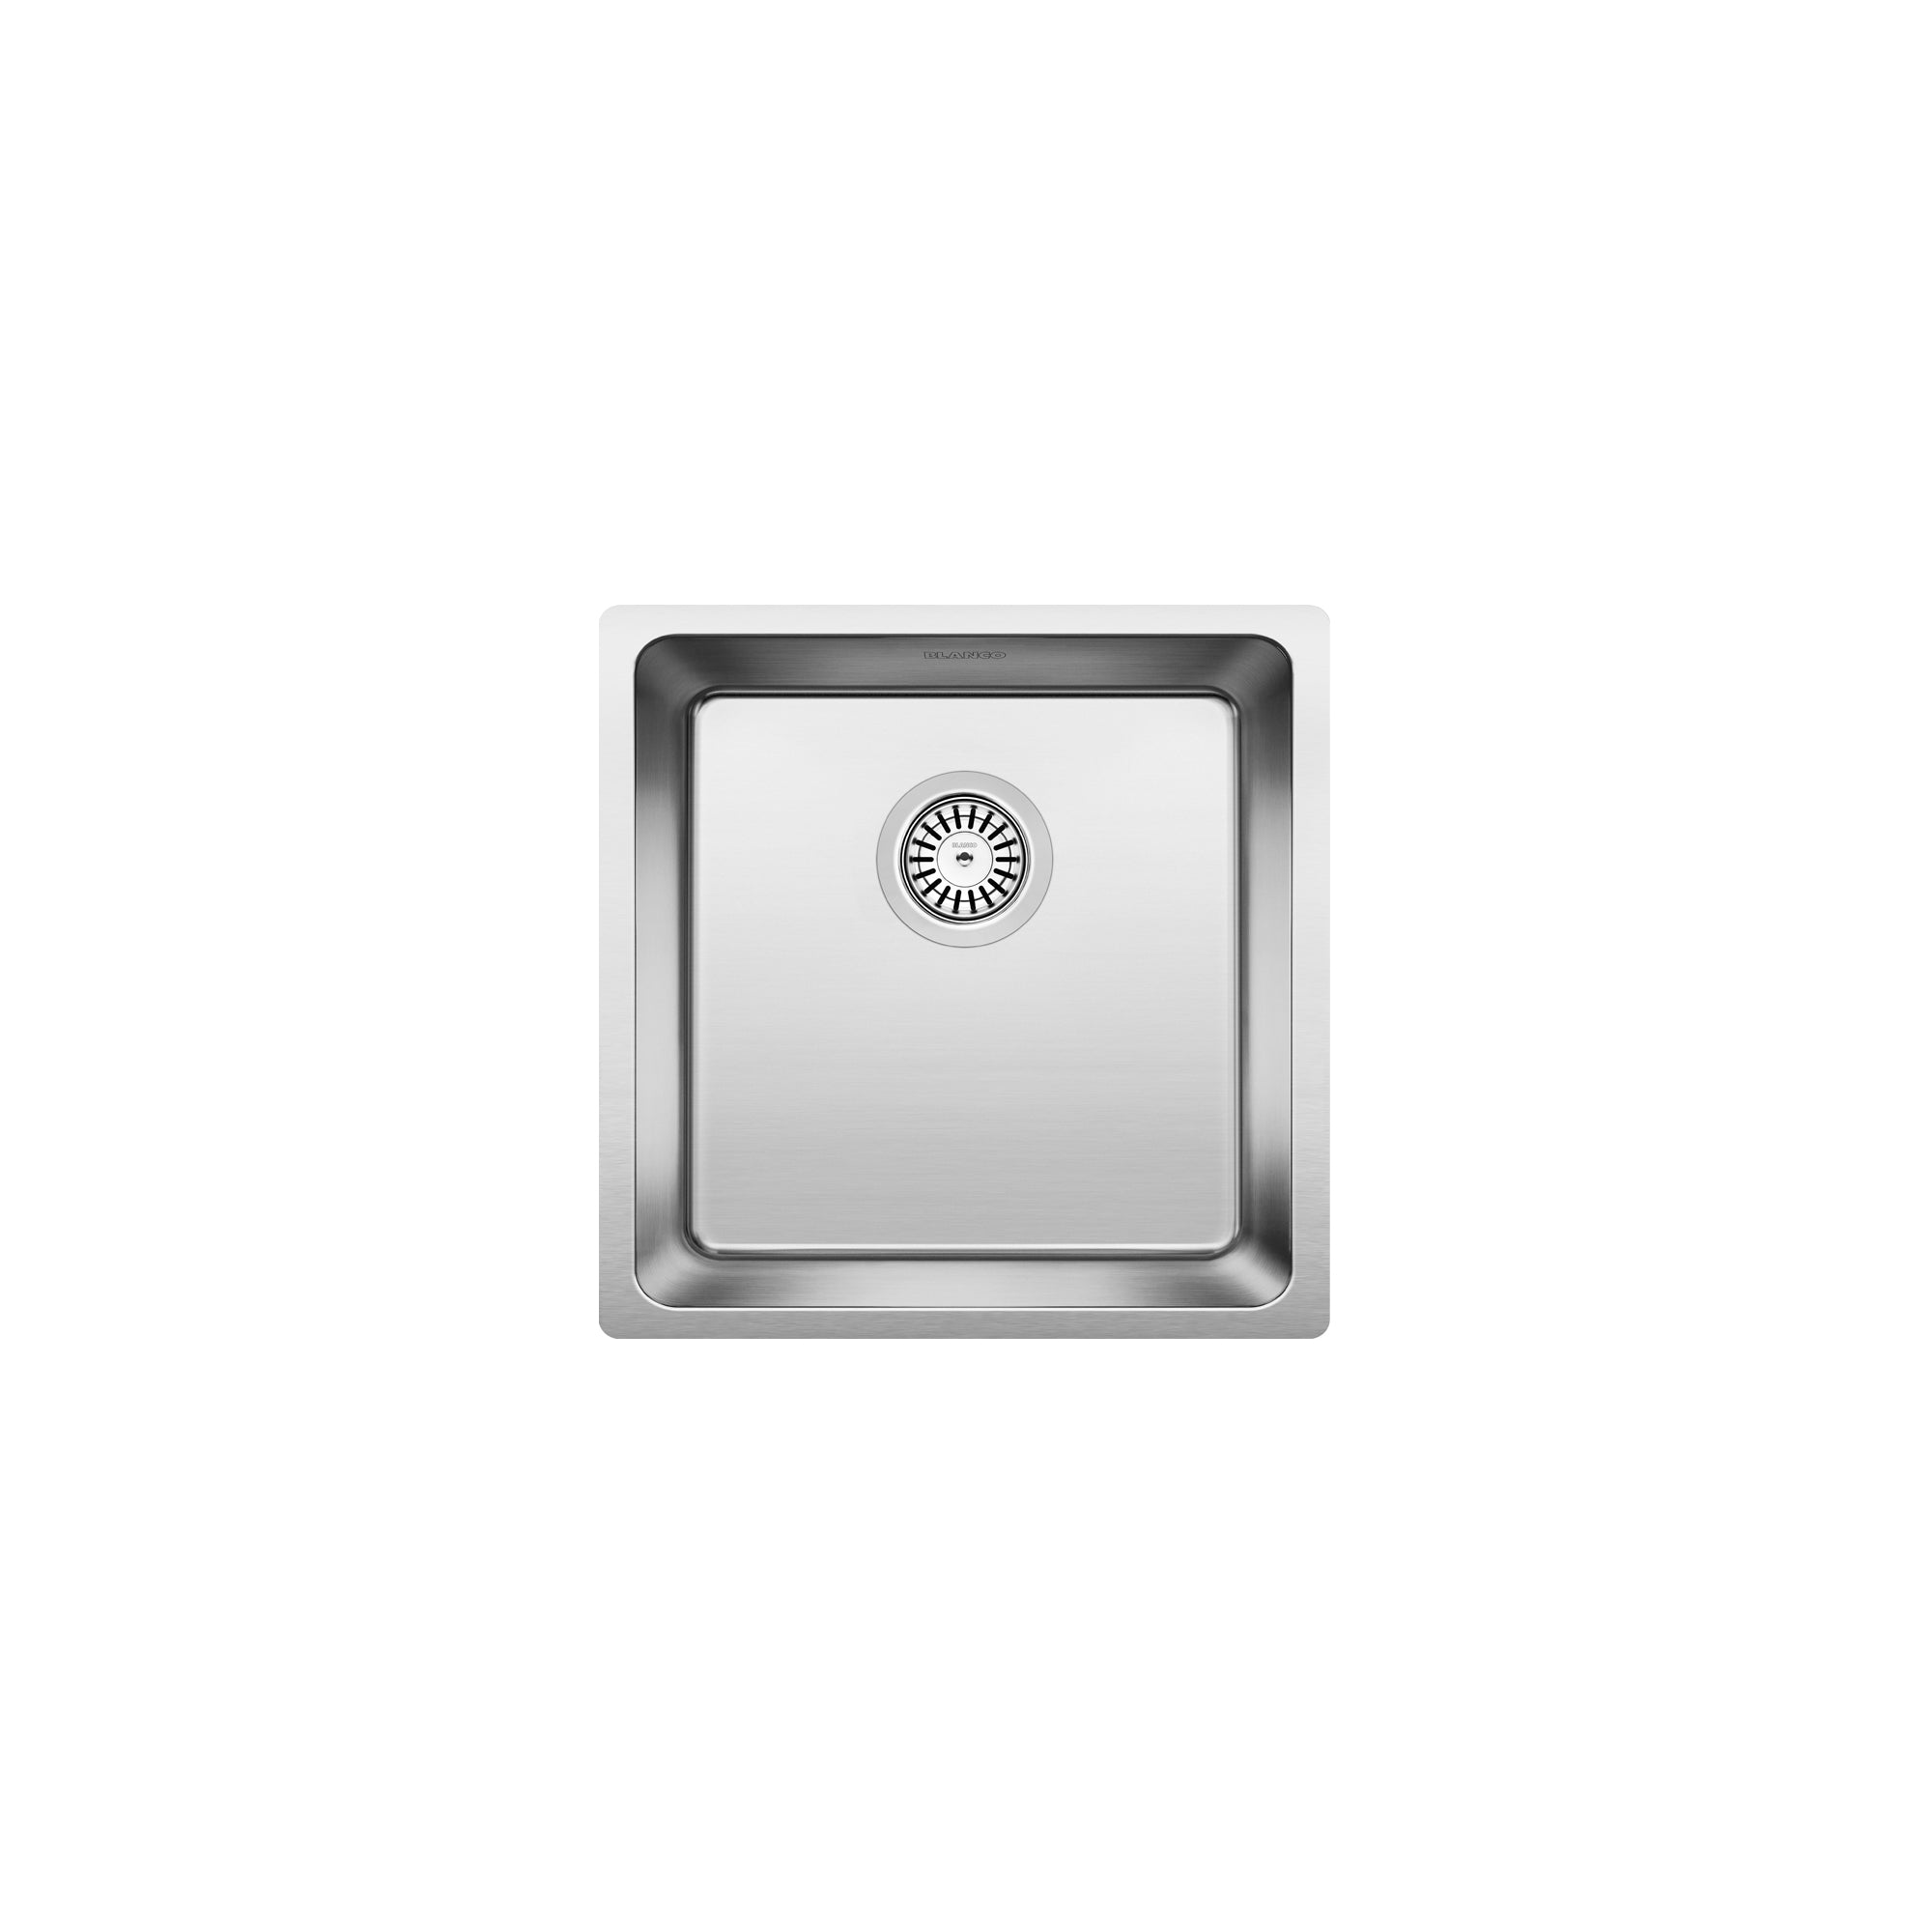 Blanco 401331- ANDANO U Small Single Bowl Undermount Sink, Stainless Steel - FaucetExpress.ca